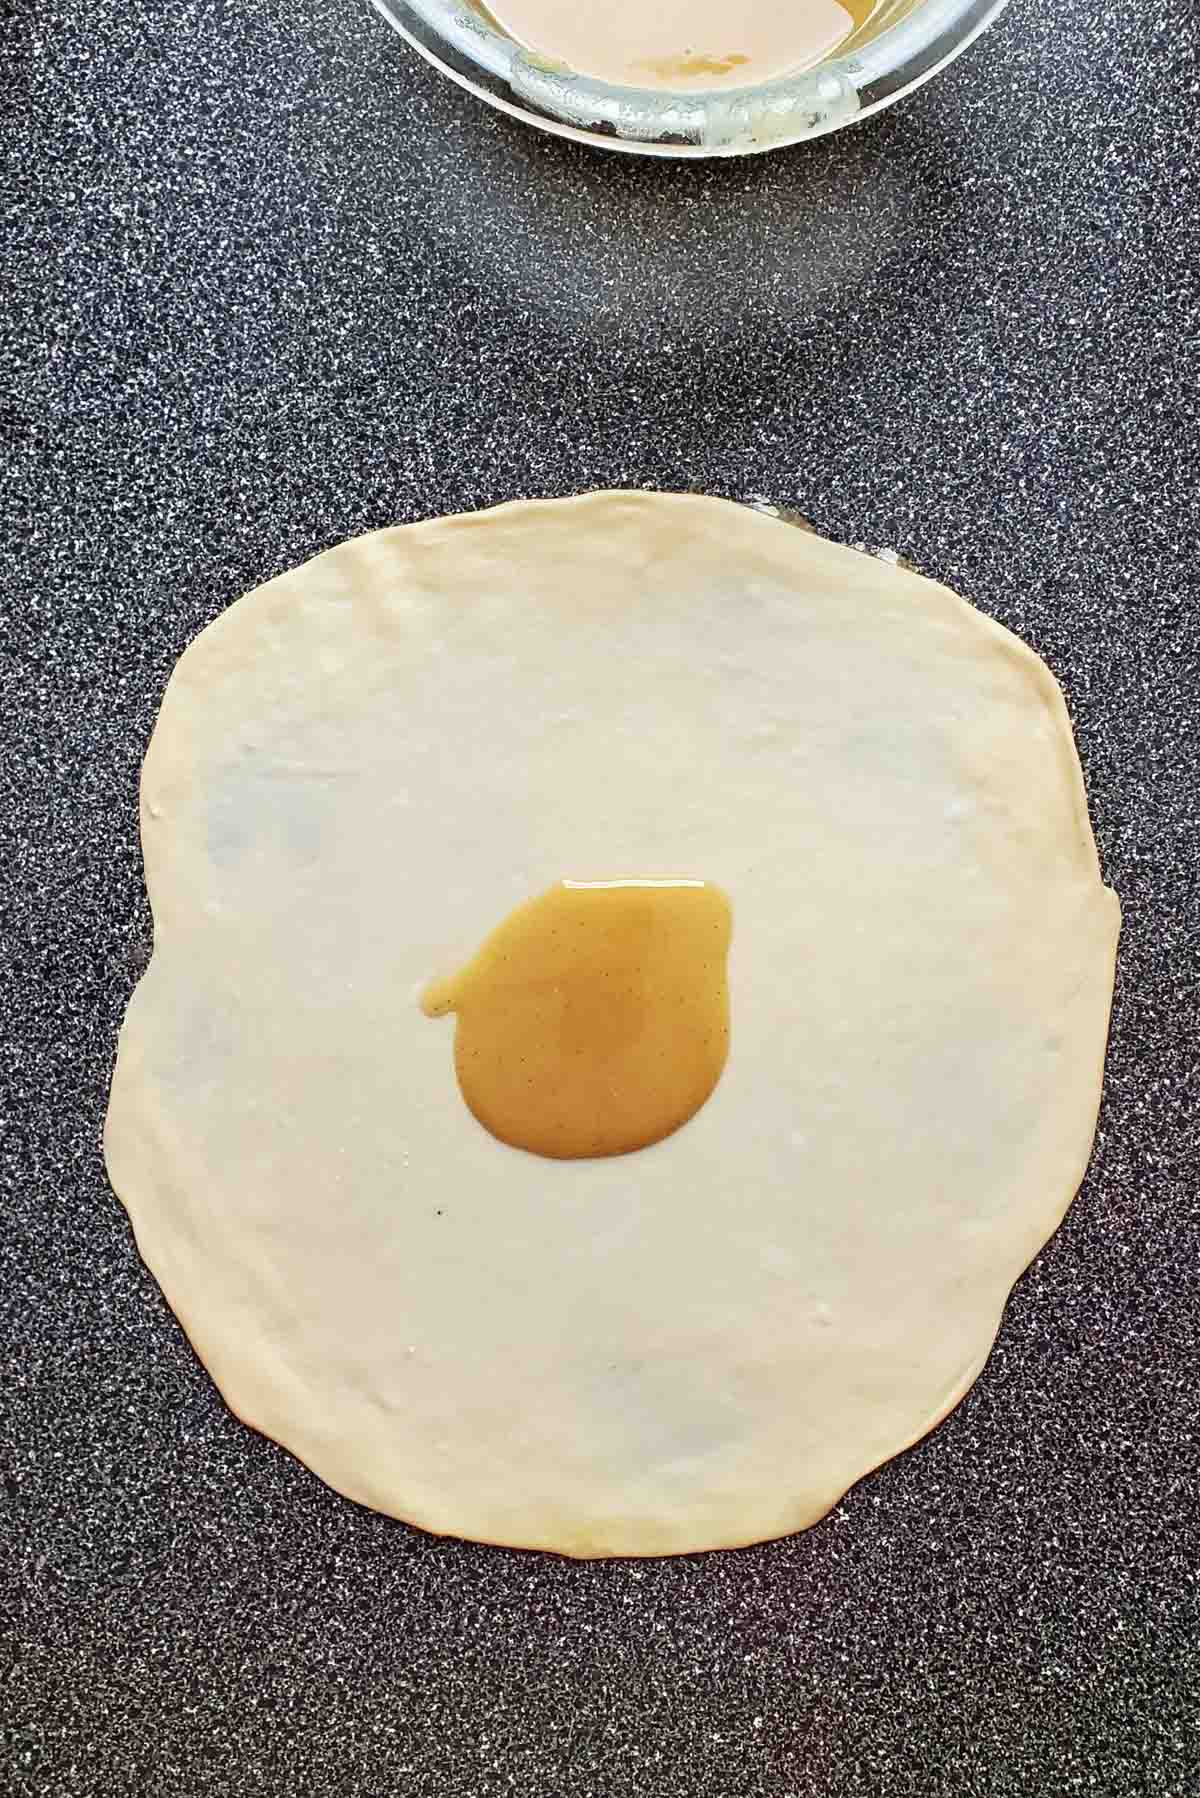 A spoonful of flour and oil paste placed in the middle of the rolled out dough.